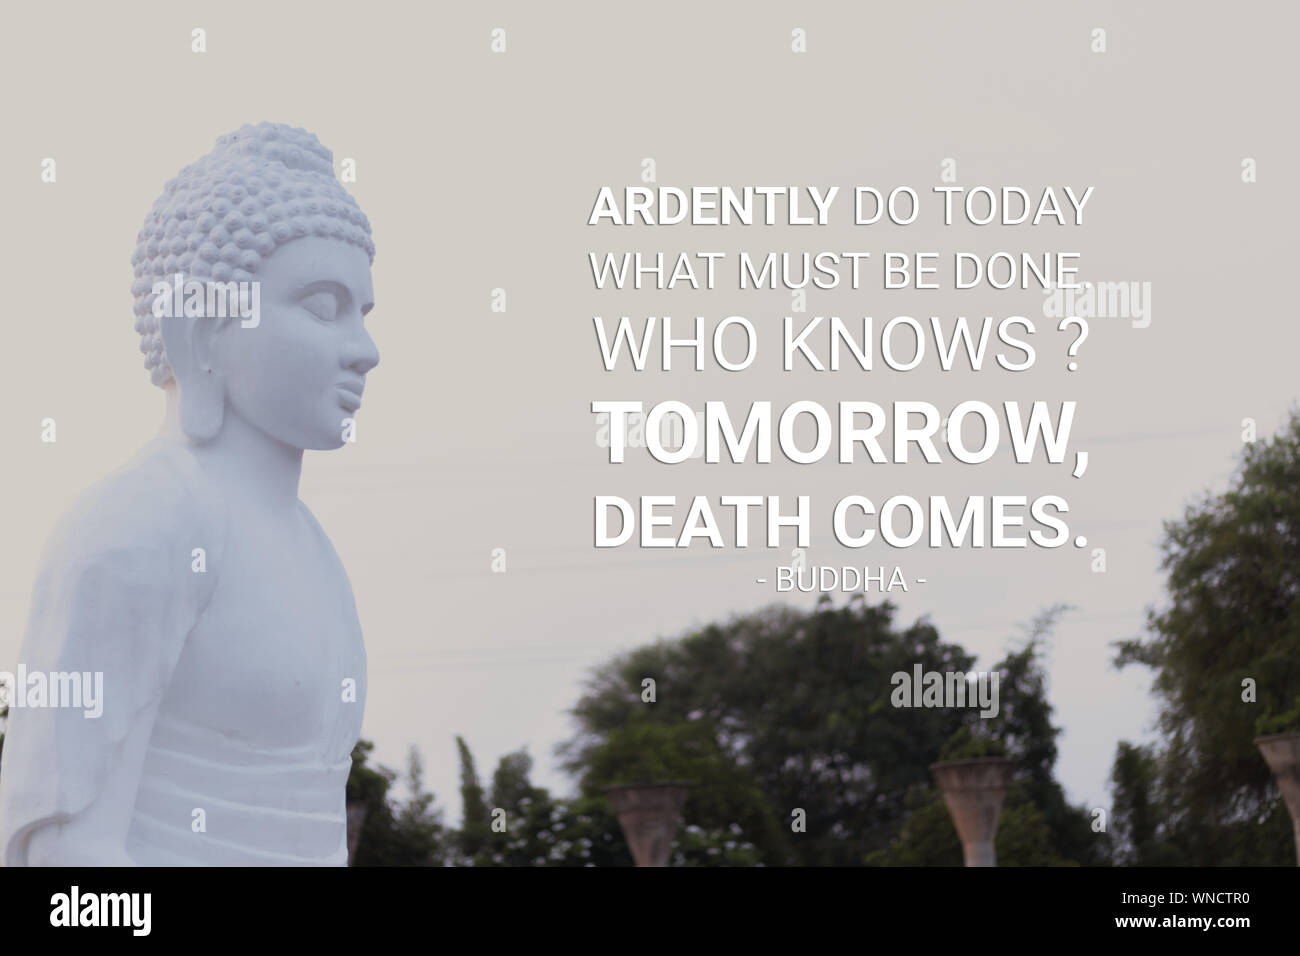 Ardently do today what must be done who knows tomorrow death comes - buddha (2) Stock Photo